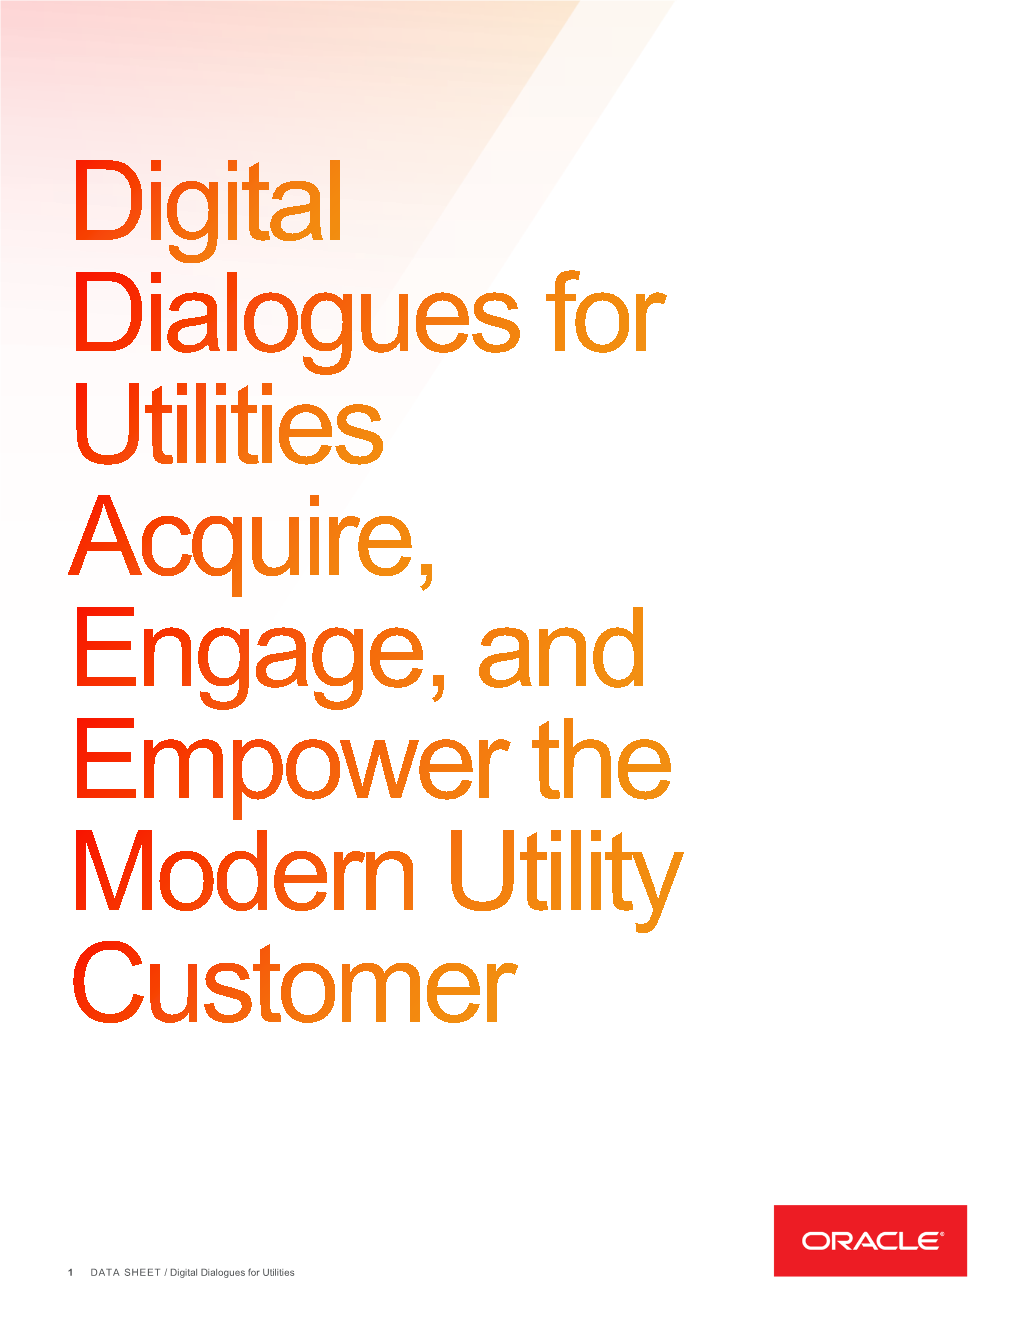 Oracle Digital Dialogues for Utilities Data Sheet